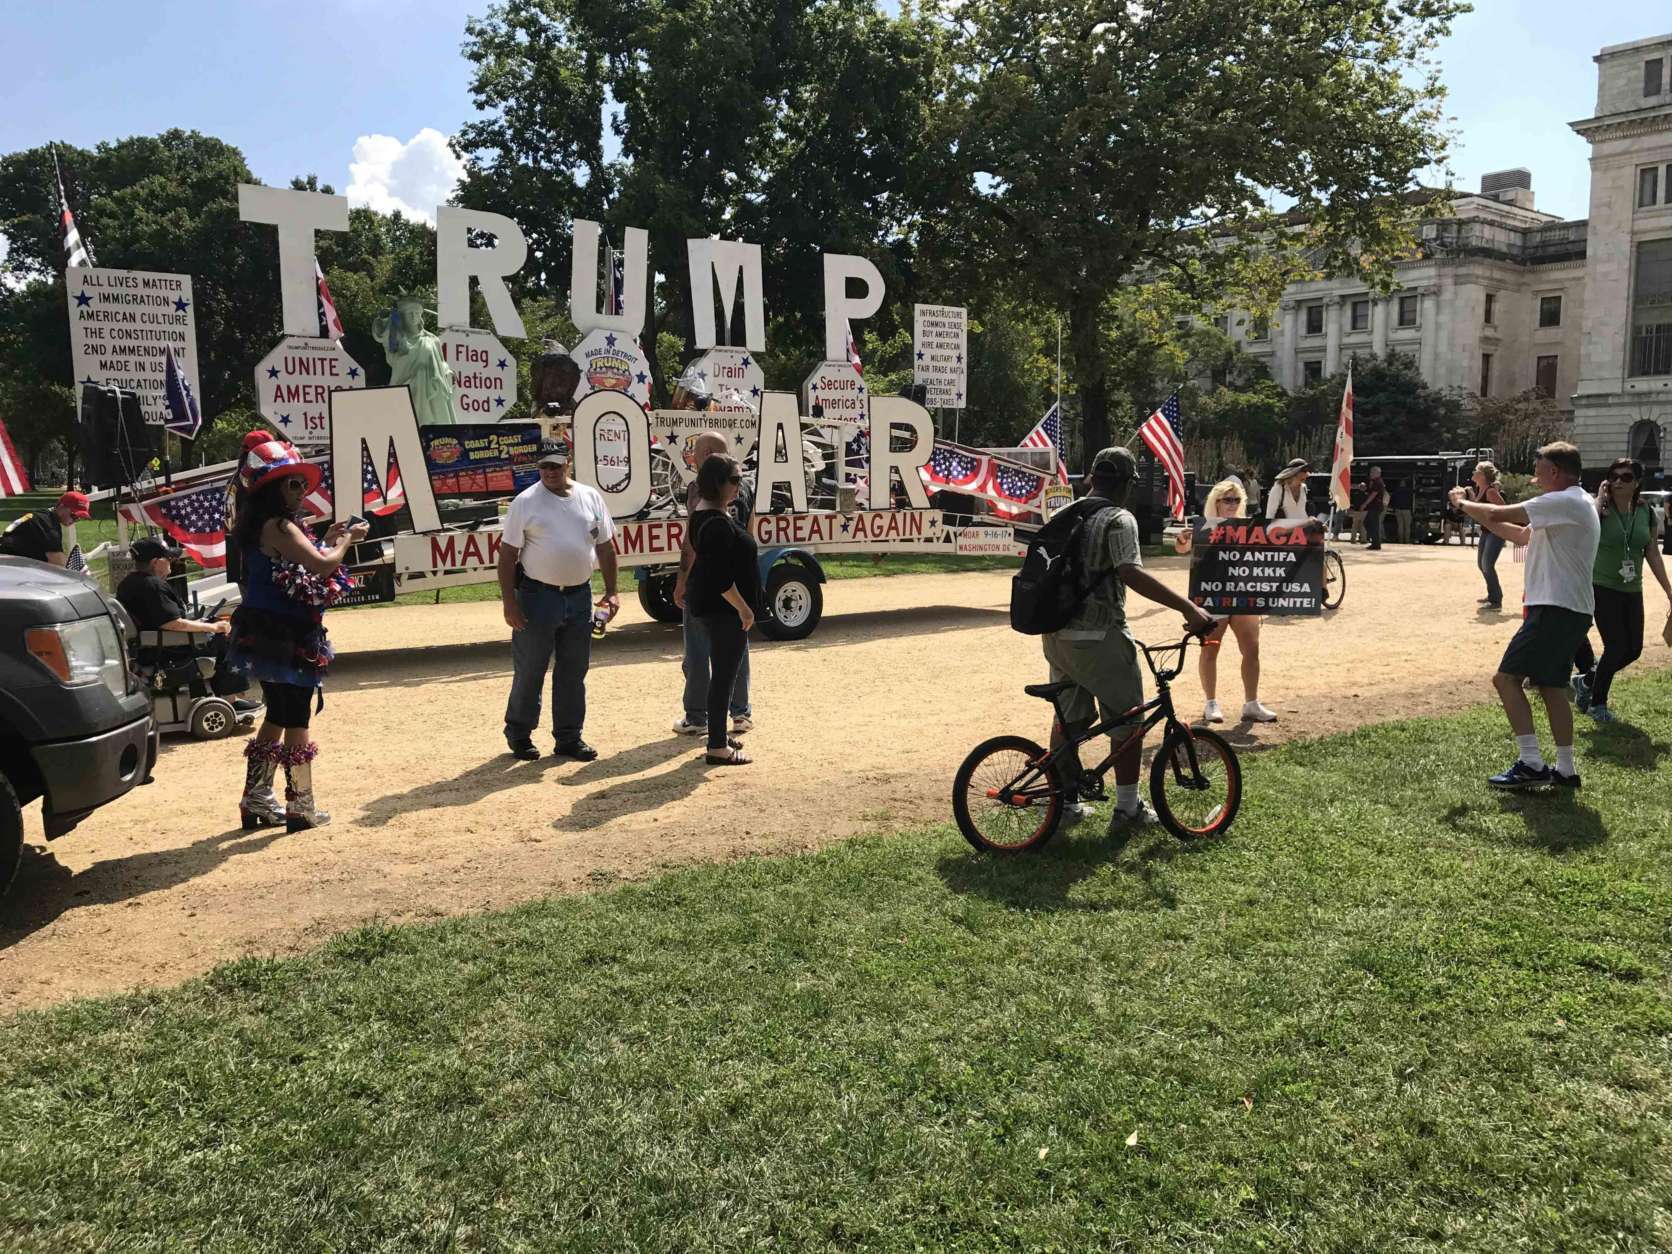 During the rally on Saturday, many of the president's supporters cheered him, even despite his recent initiatives with Democratic congressional leaders. (WTOP/Dick Uliano)